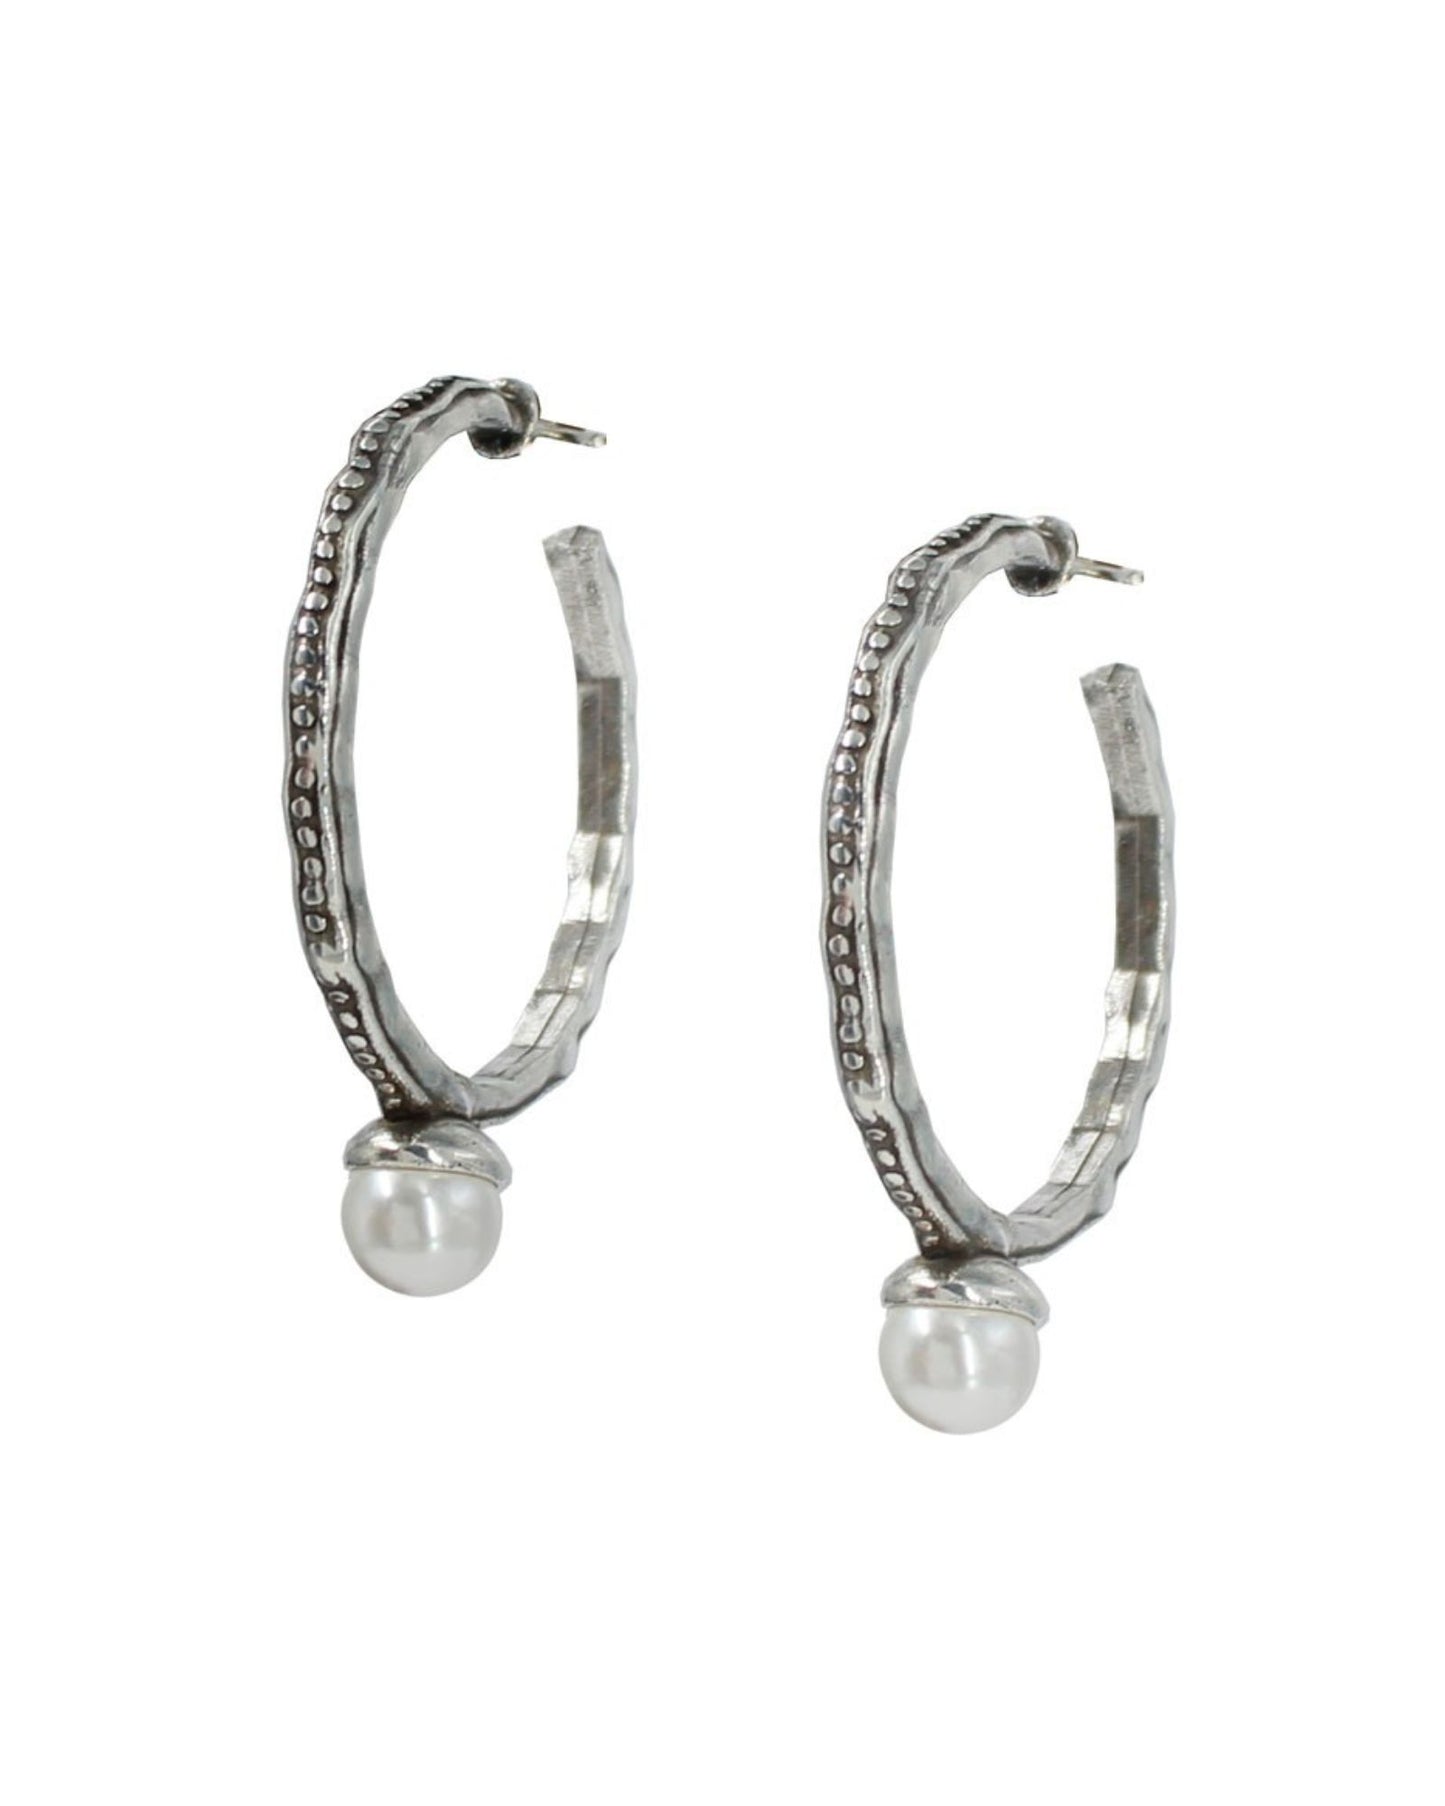 Textured Silver Statement Hoop Earrings  w/Pearl Accent